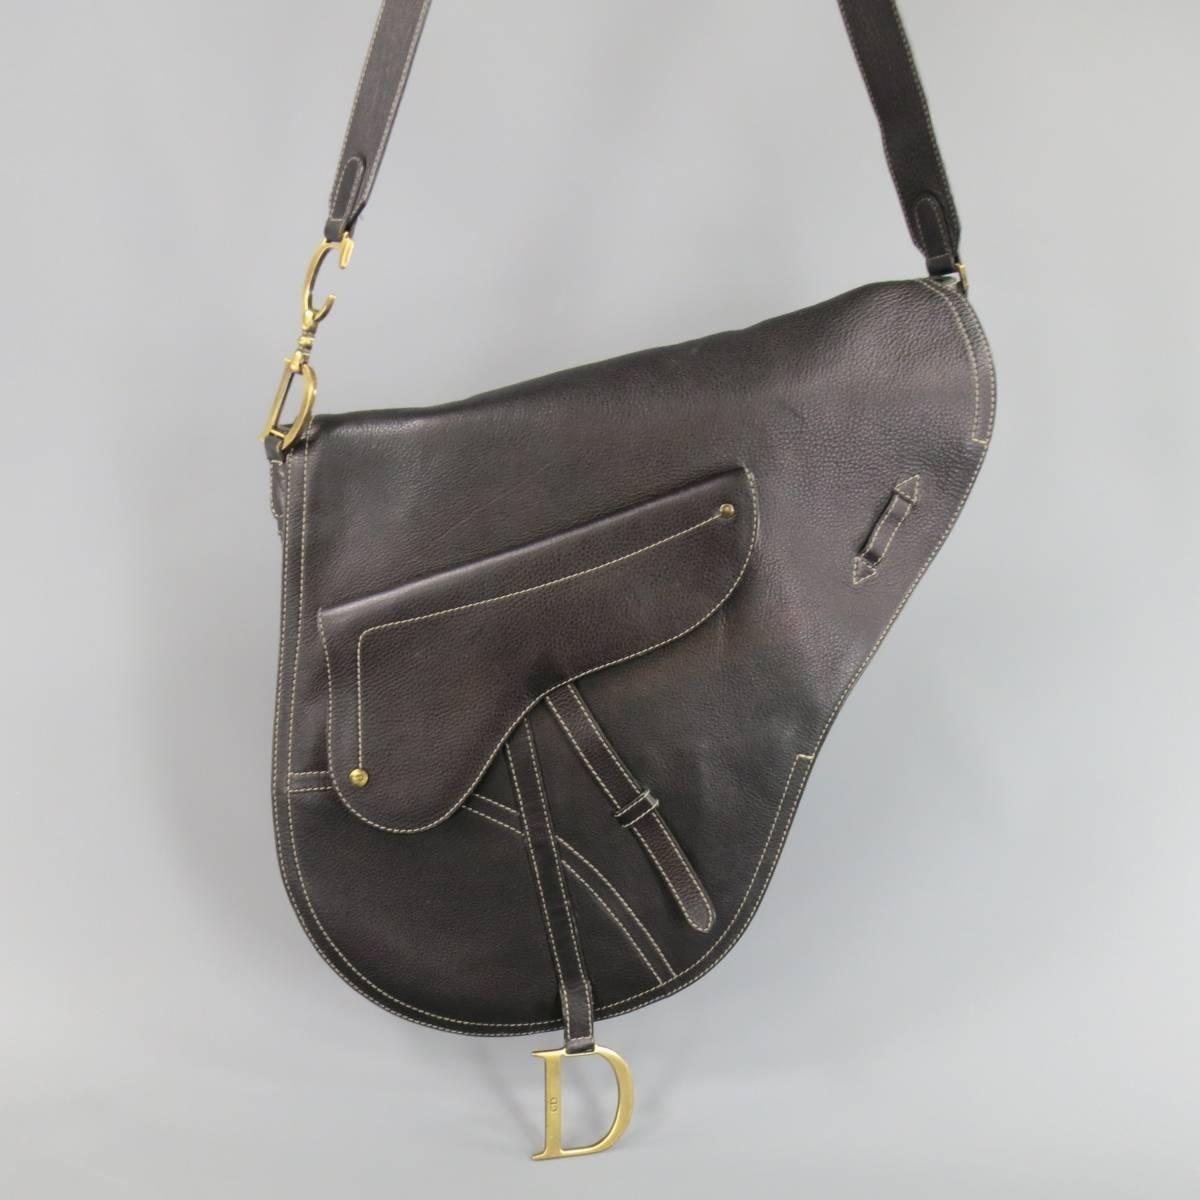 Iconic CHRISTIAN DIOR large crossbody saddle bag in deep brown black leather with contrast stitching, frontal snap pocket, dark gold tone engraved D charm, adjustable shoulder strap with oversized 